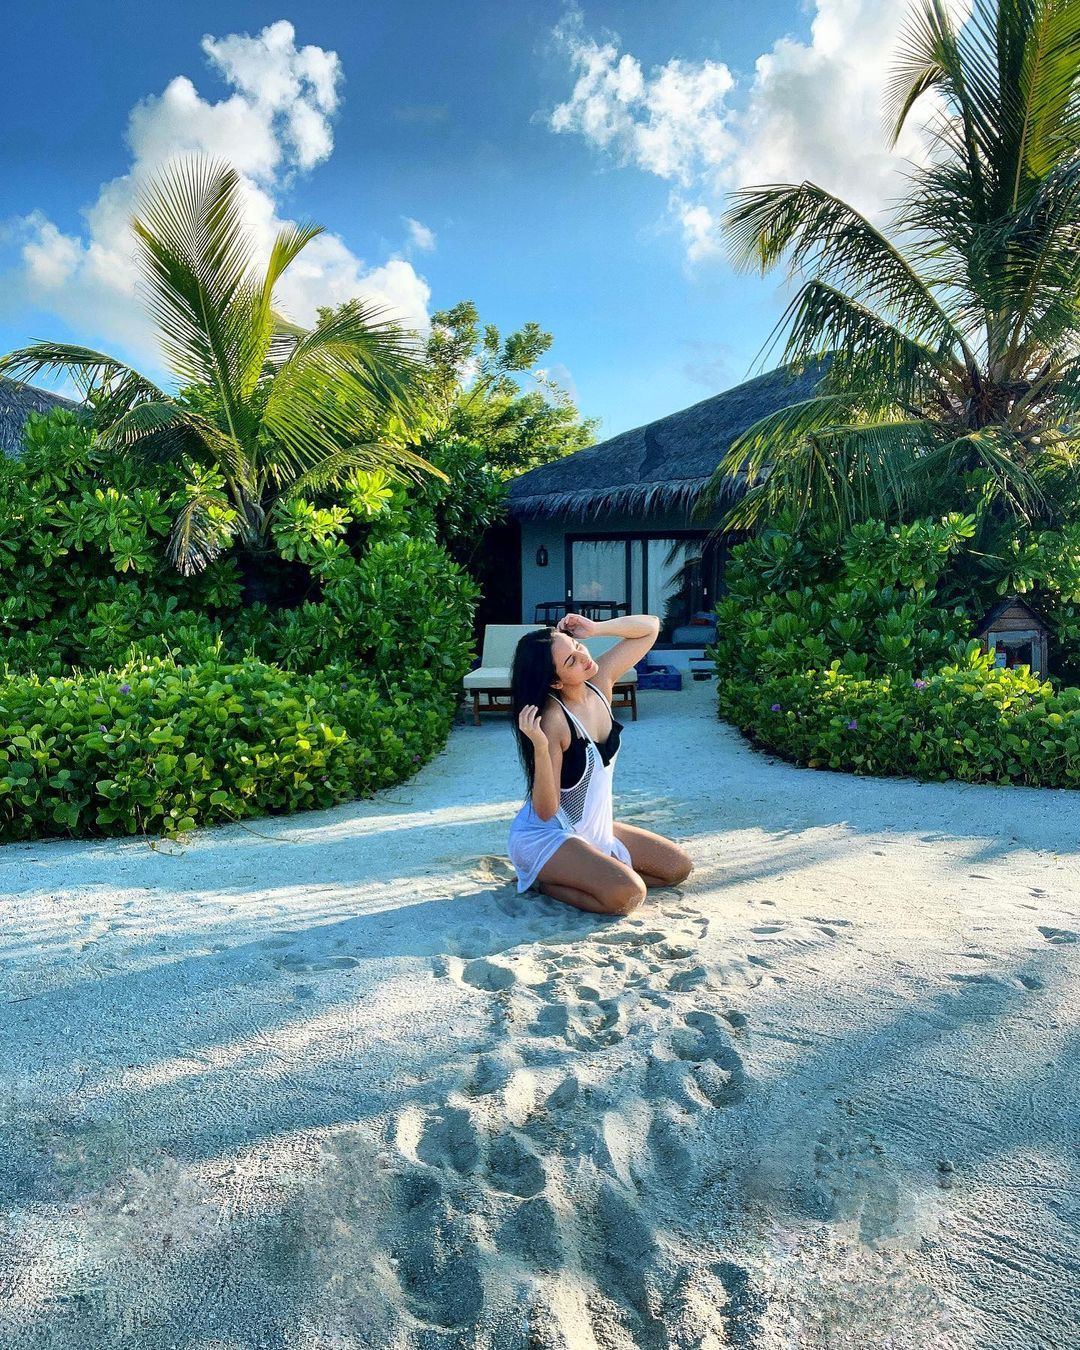 Sonakshi Sinha Channelizes Inner ‘Island Girl’ In Latest Snaps From Her Maldives Vacation